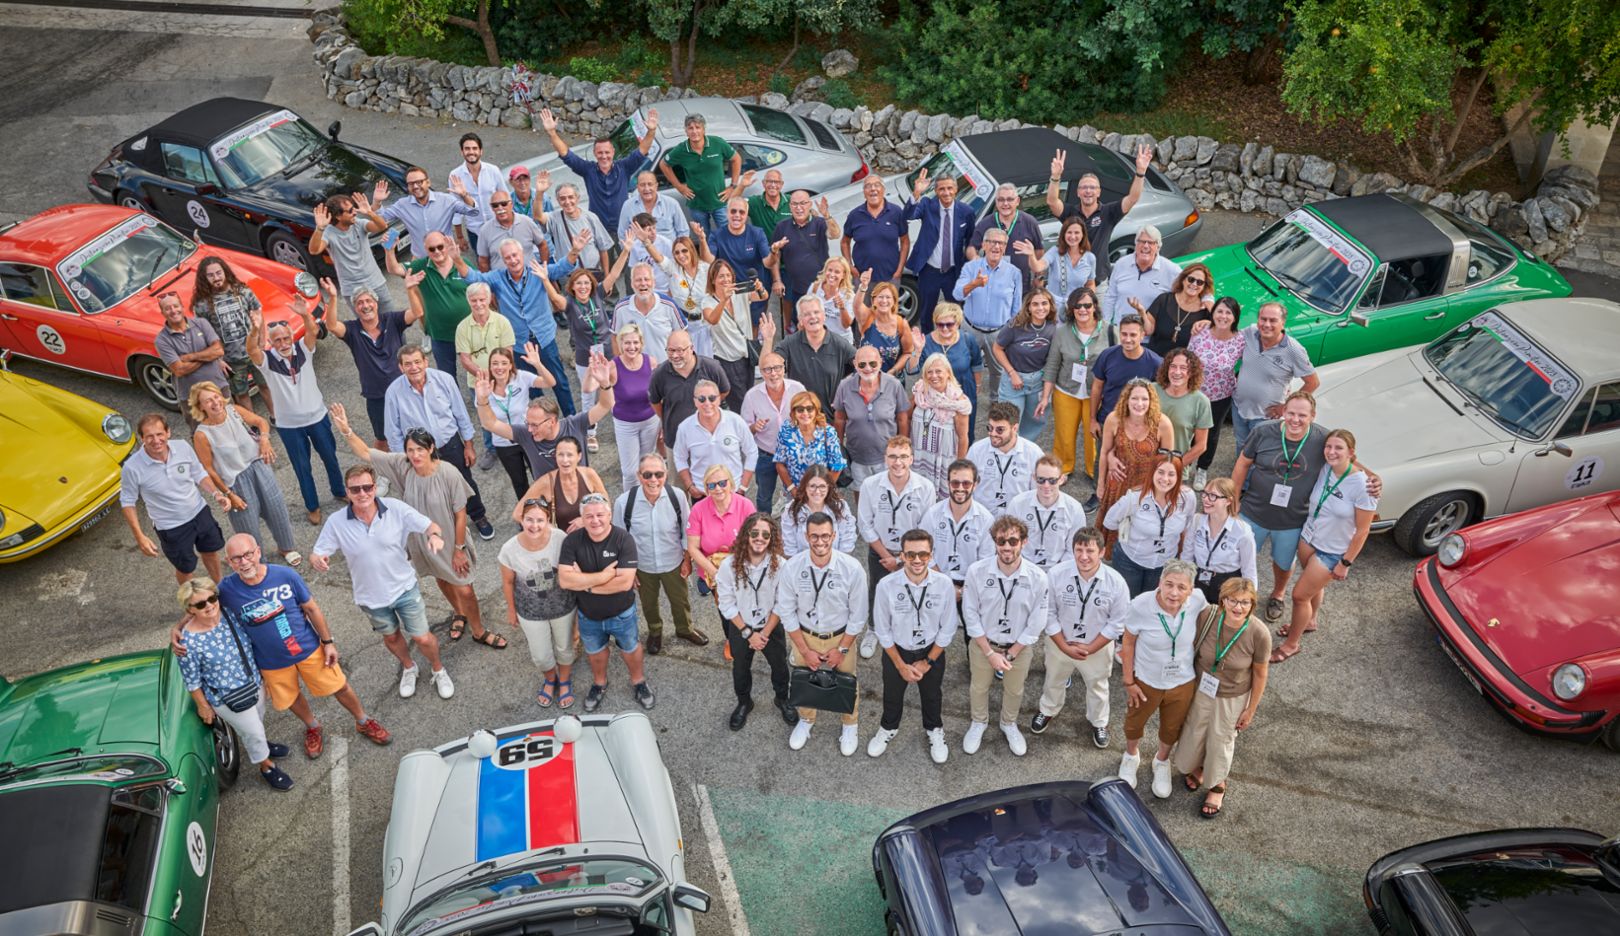 Welcome to Italy (Benvenuti!): A group picture with the Porsche enthusiasts in front of the clubhouse of the Italians in Manduria.